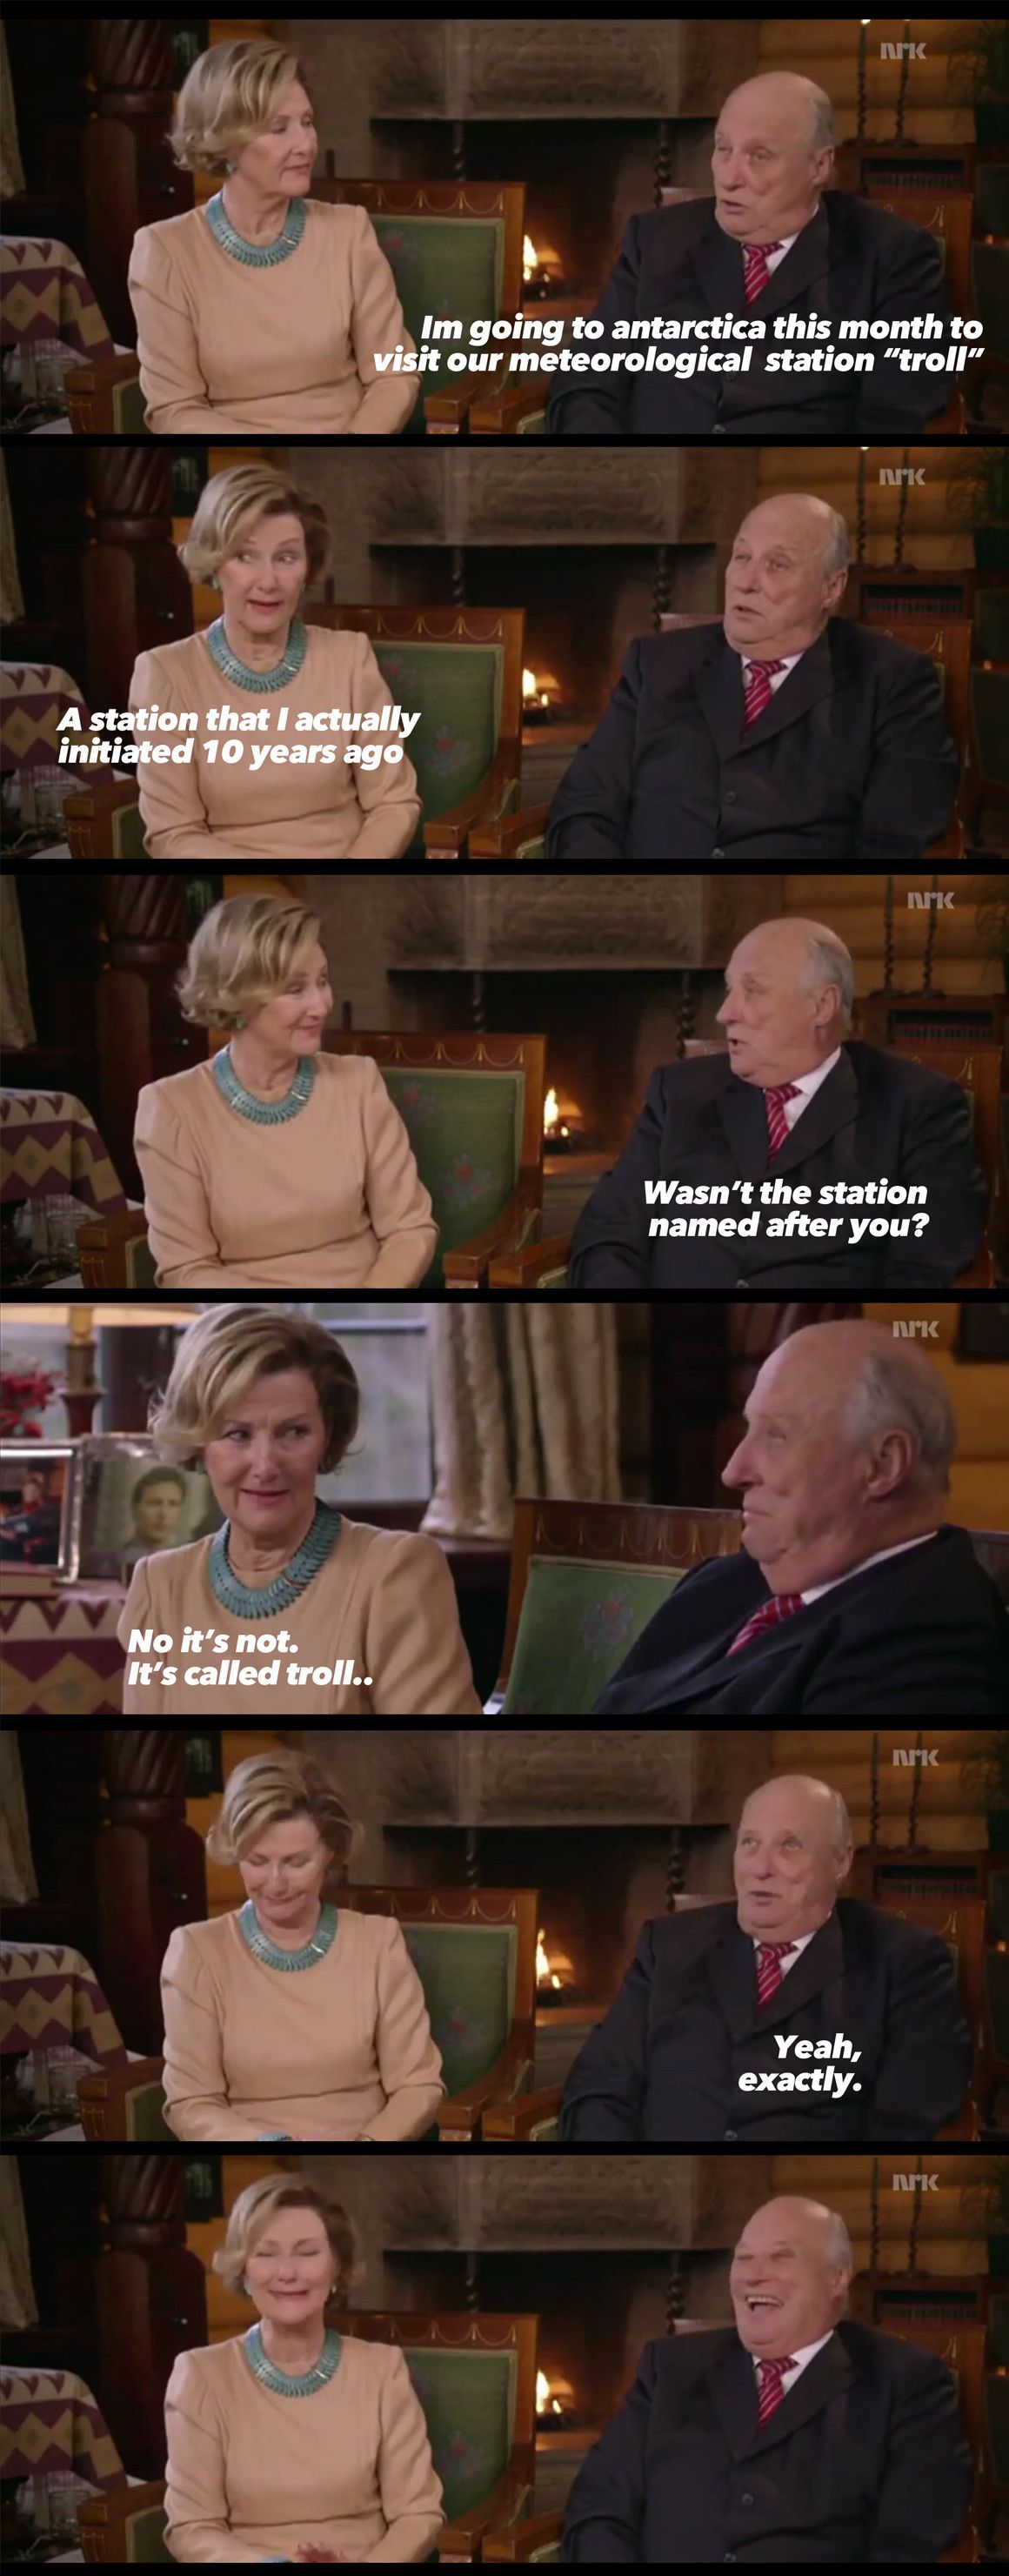 Today is the eighty-first birthday of Harald V, king of Norway. Here's a joke he made on national television a few years ago. The lady is his wife, the queen of Norway